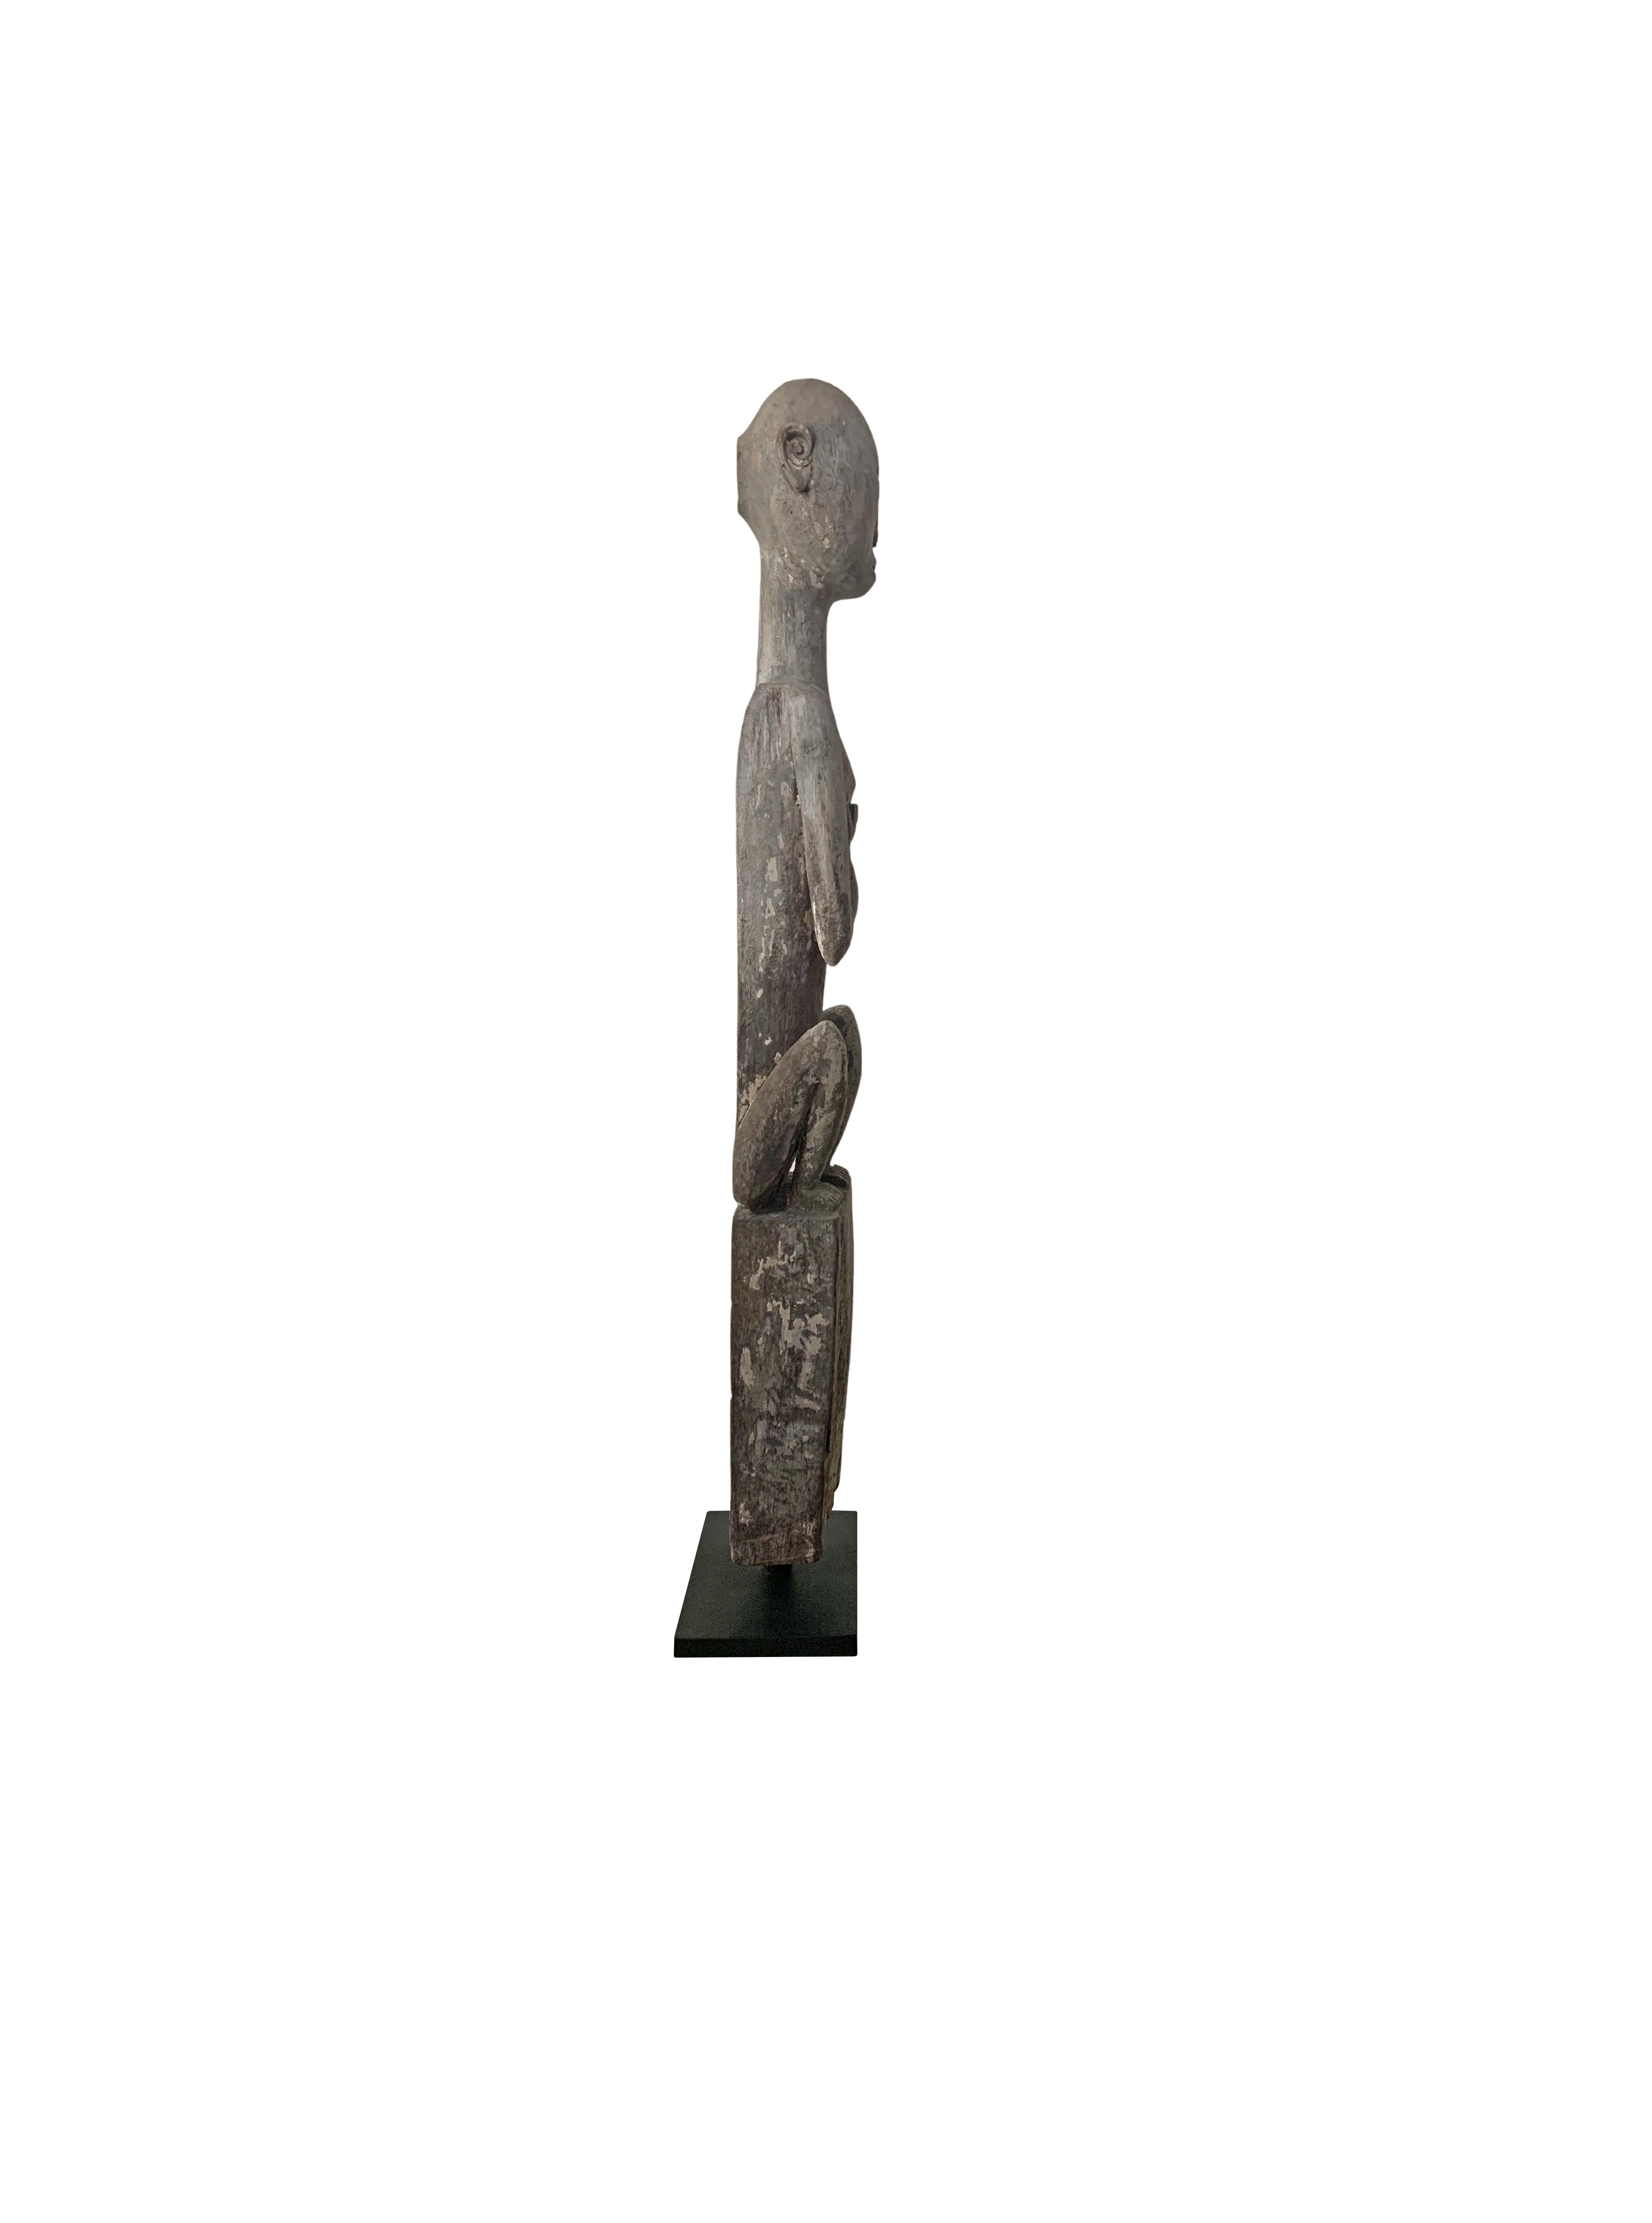 20th Century Wooden Tribal Sculpture / Carving of Ancestral Figure, Sumba Island, Indonesia